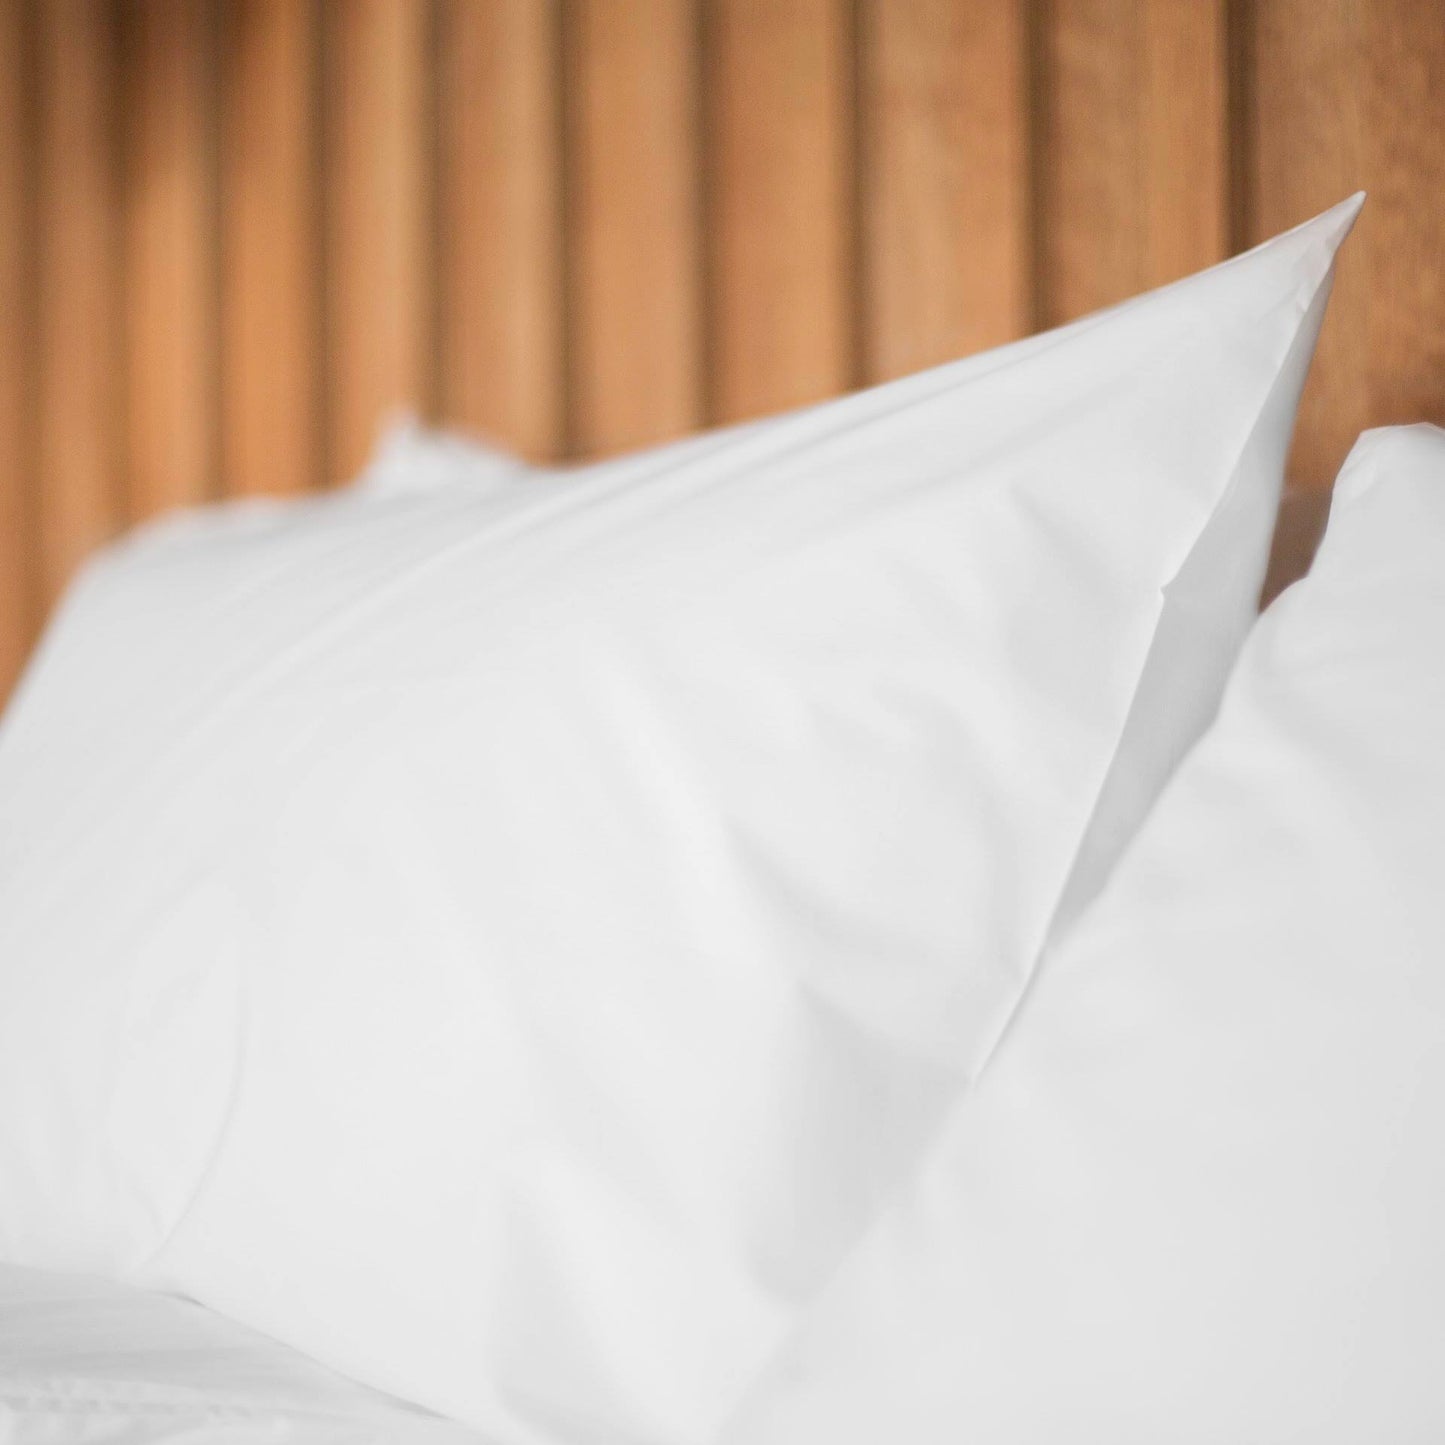 Pillowcases: The Classic Hotel Sheet